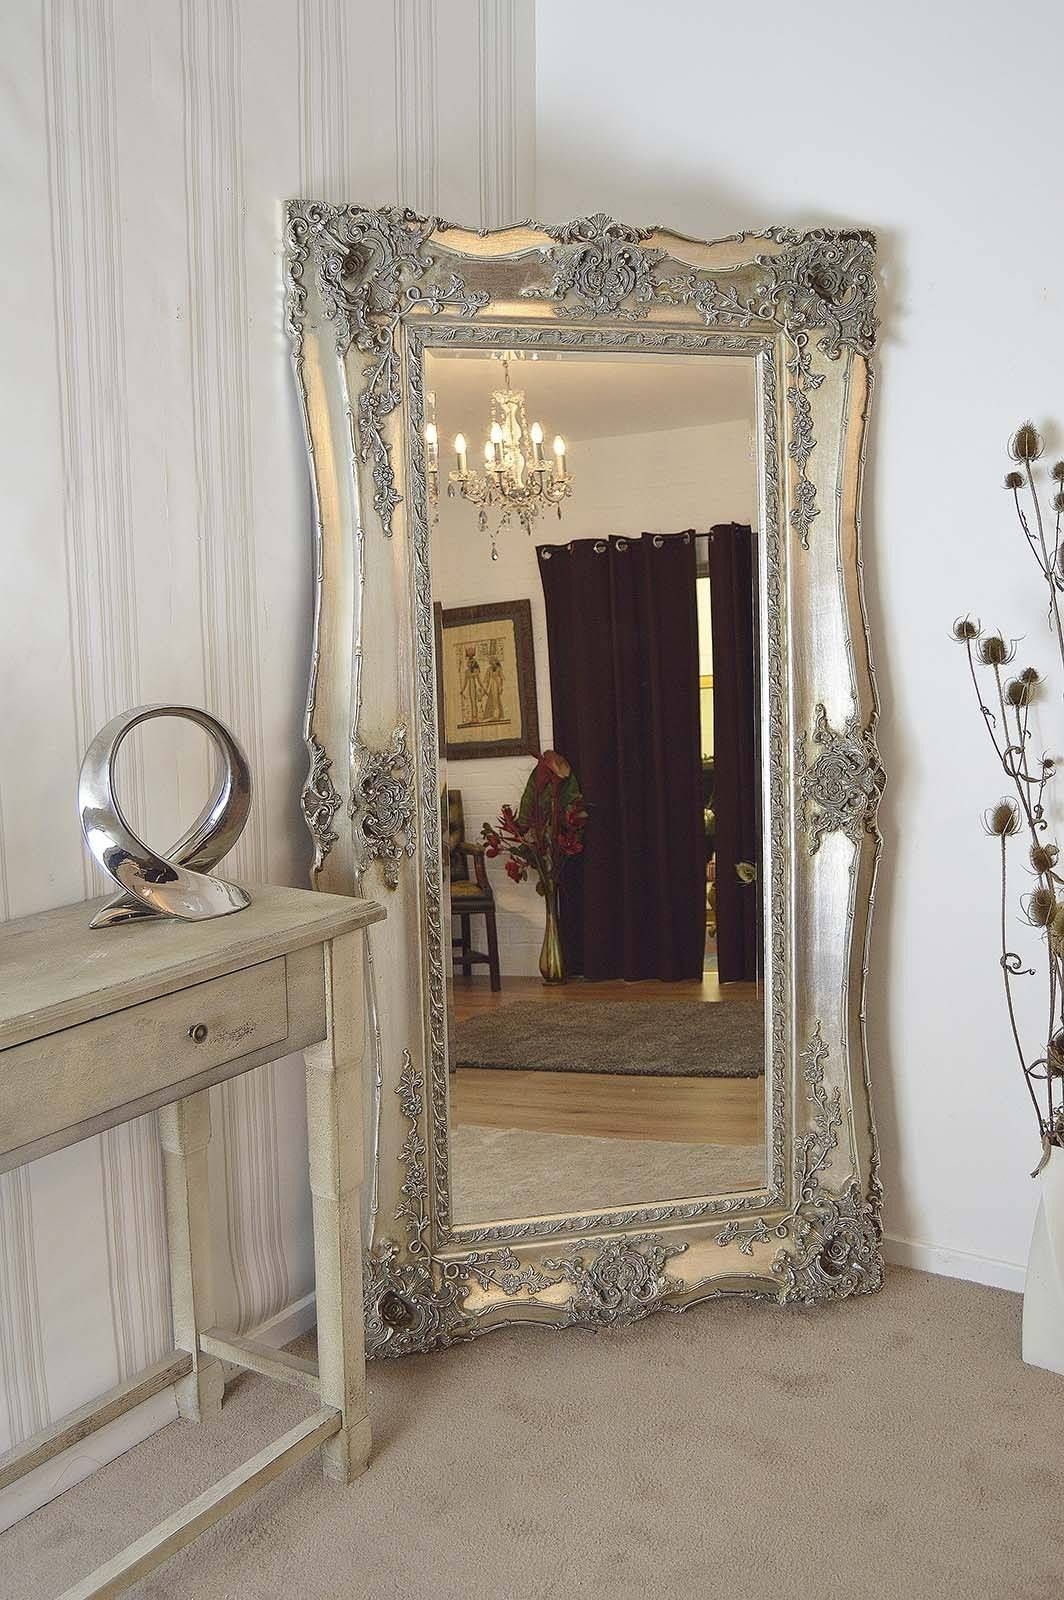 Big Floor Mirrors | Vanity Decoration Within Big Standing Mirrors (View 4 of 15)